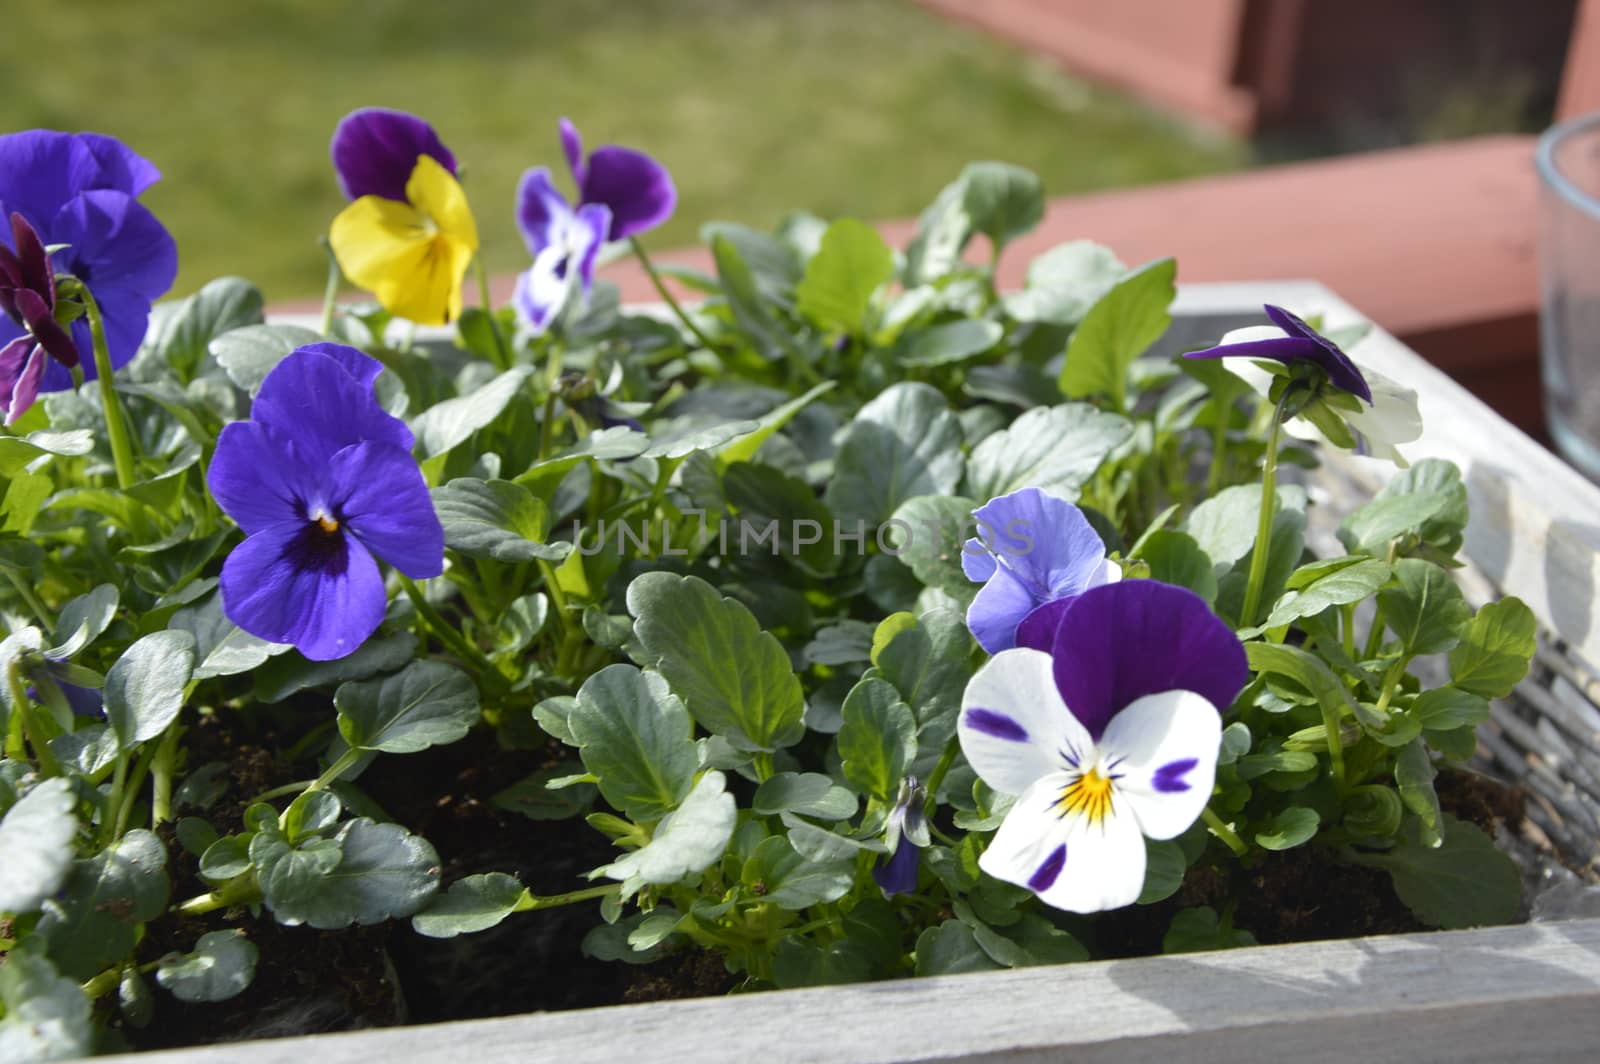 nice HD flowers in sun, good quality pictures reliable.